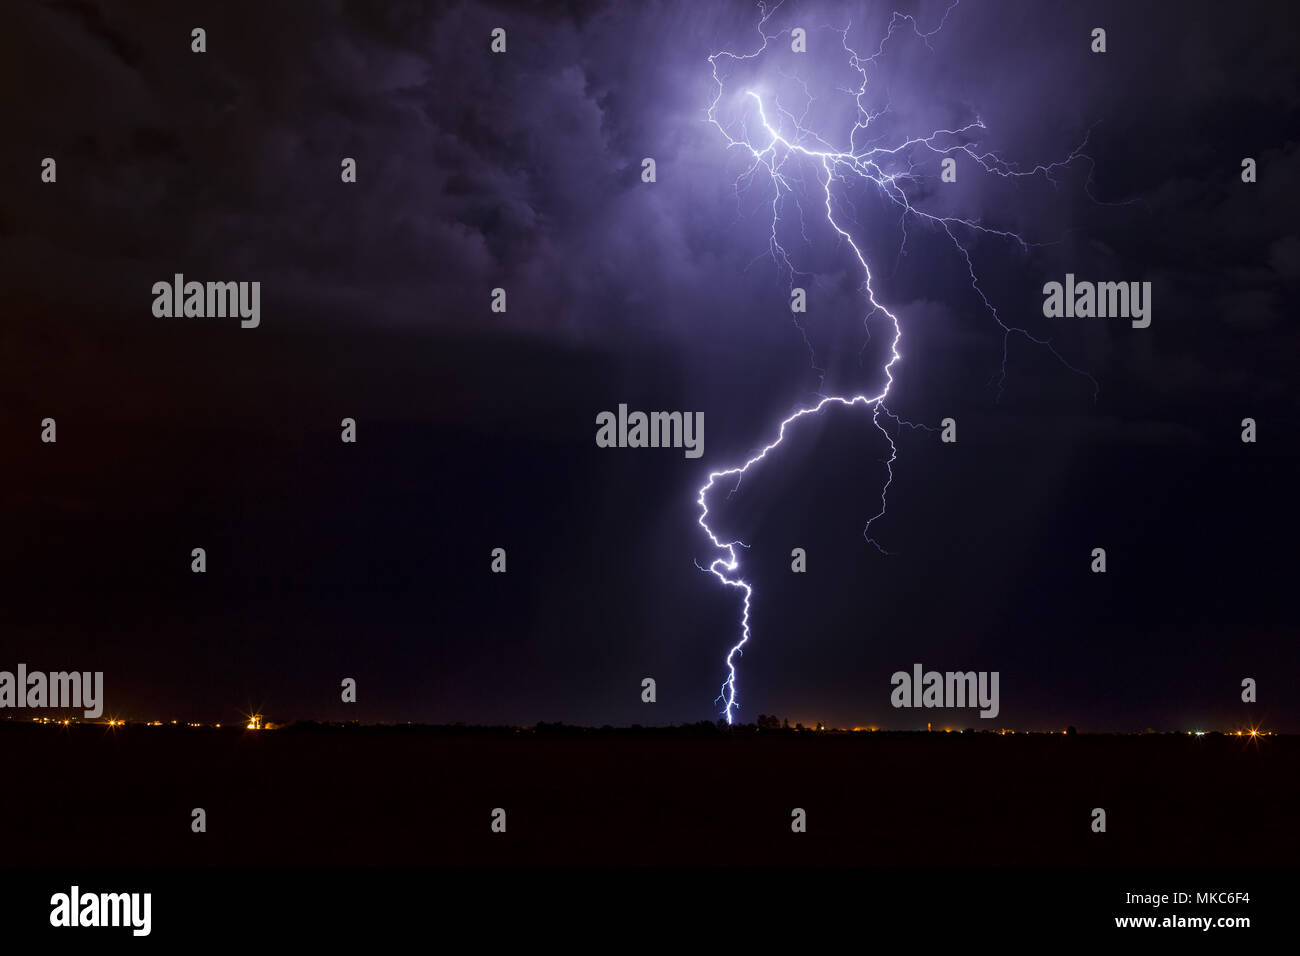 An energetic lightning bolt striking in a late night thunderstorm over Casa Grande, Arizona Stock Photo